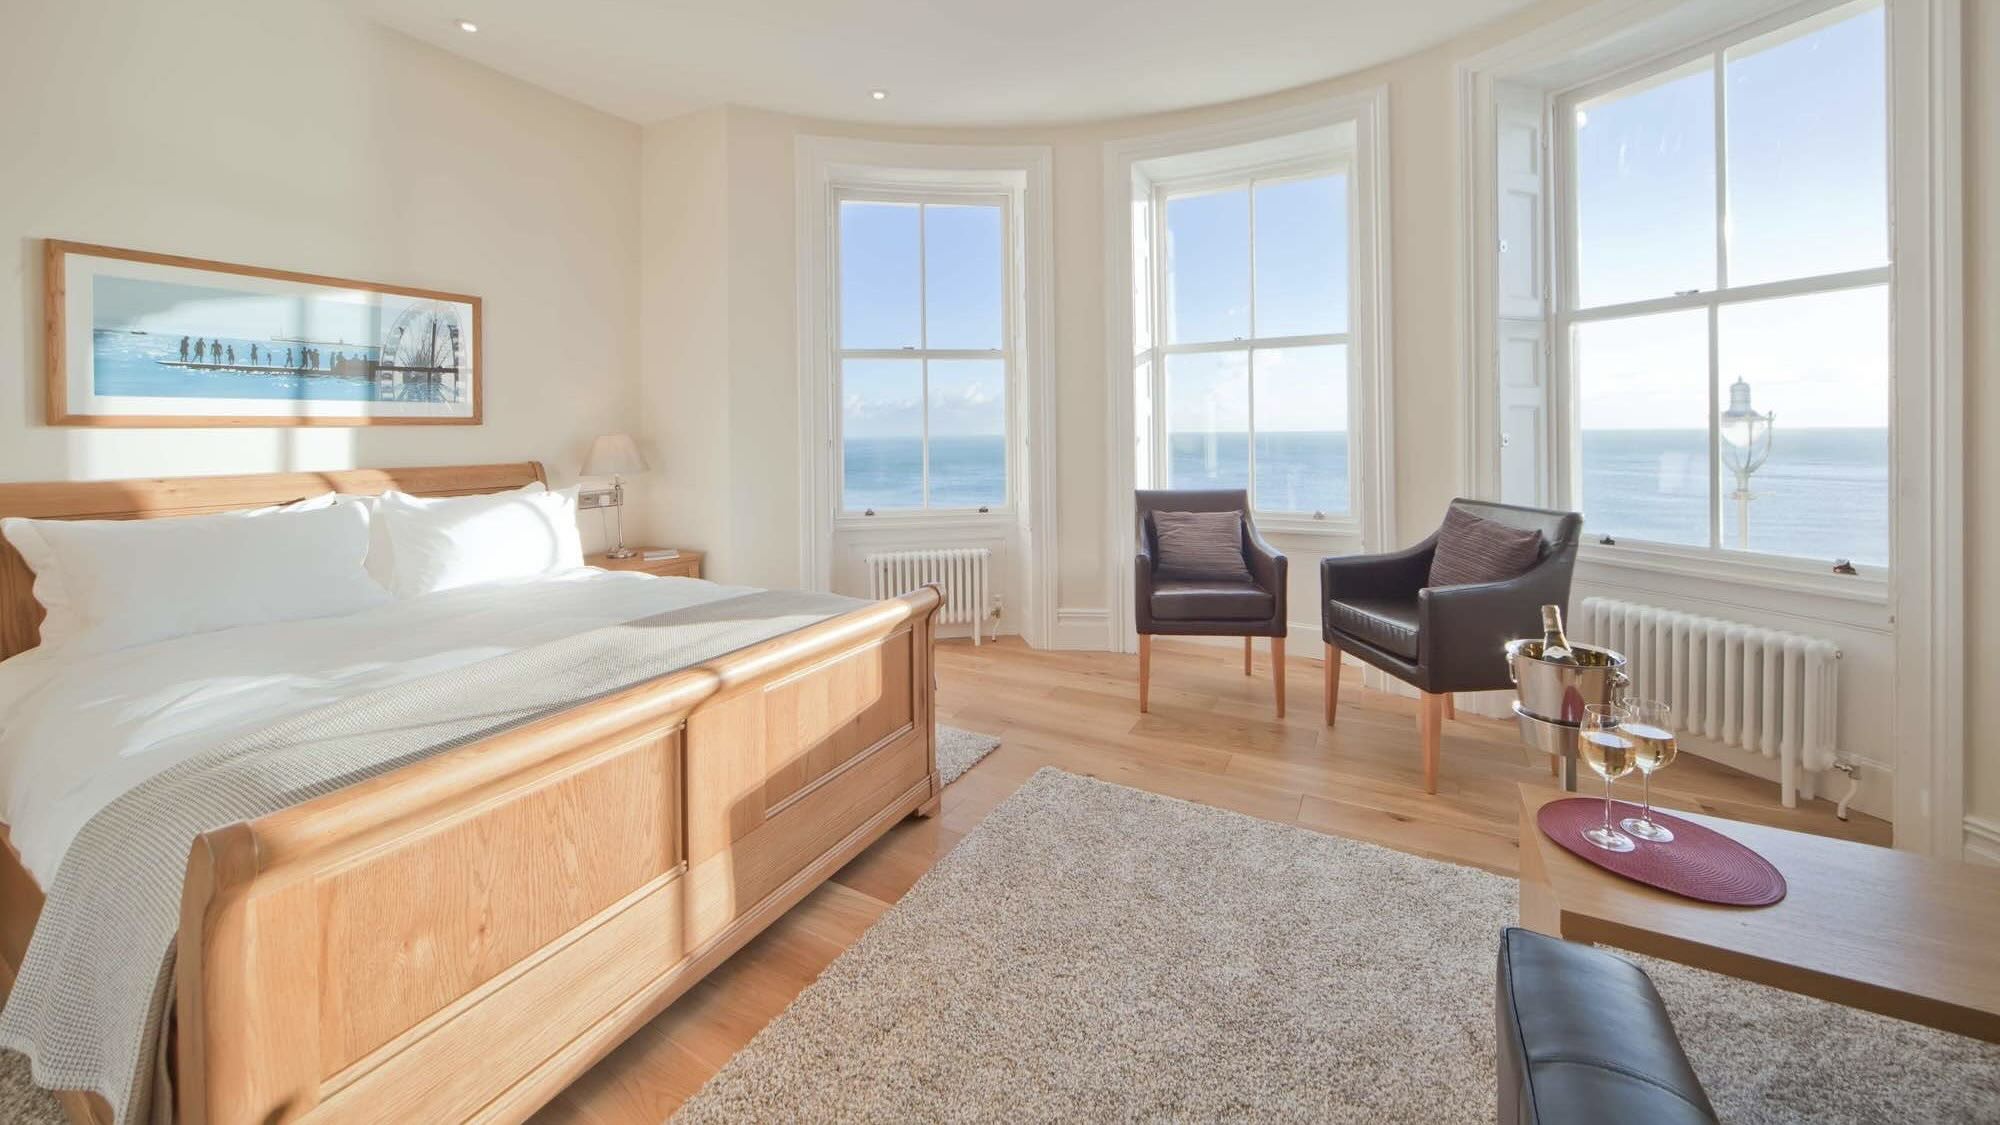 A Room With a View With seaside views is one of the best Boutique hotels in Brighton